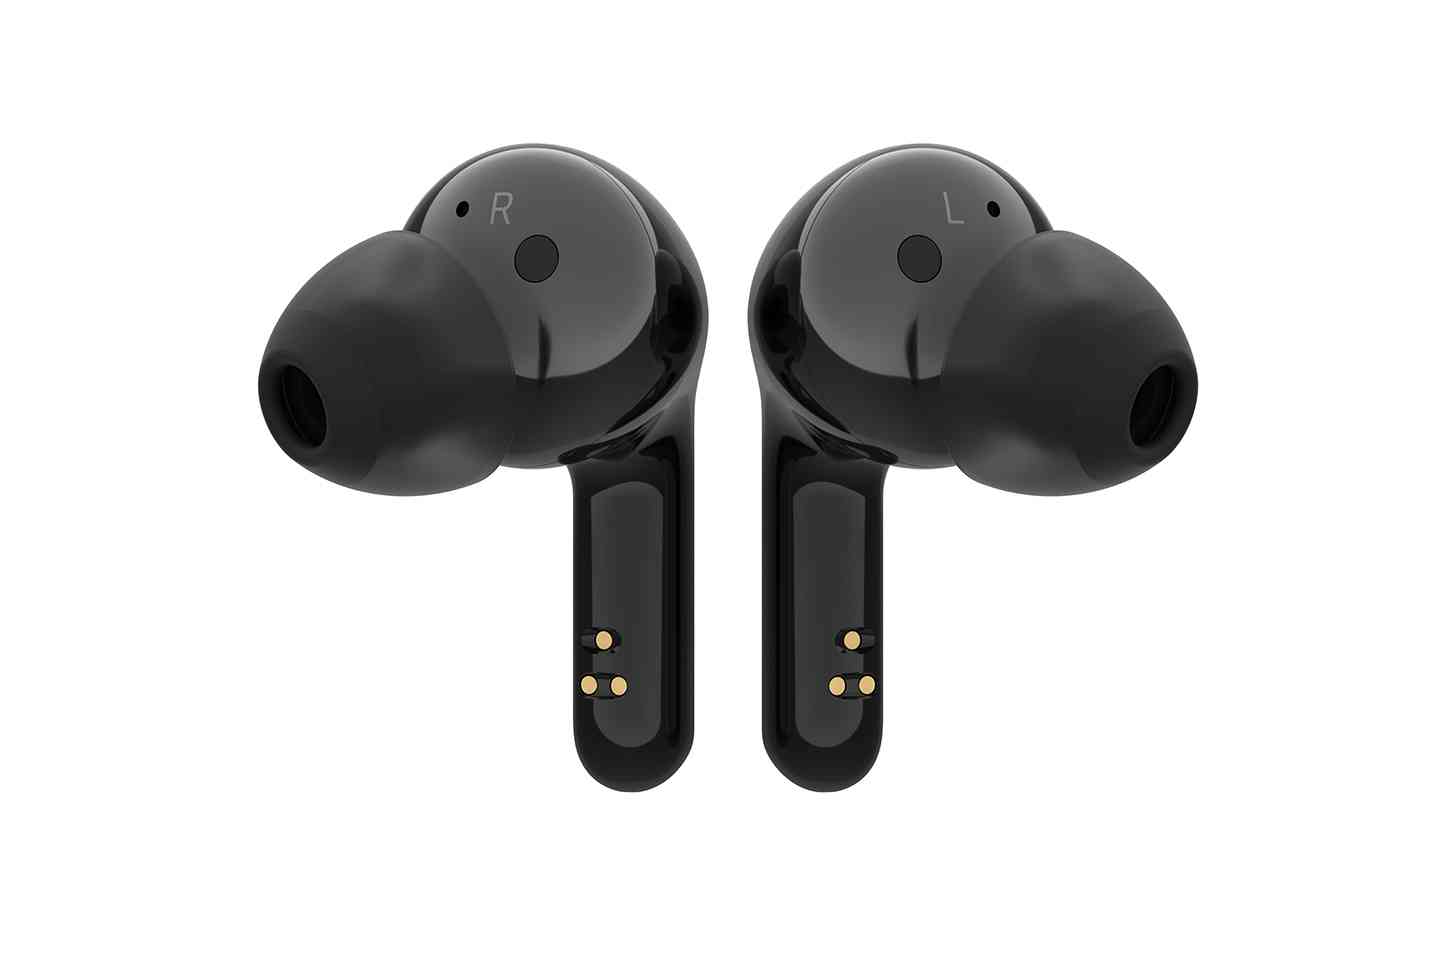 LG Tone Free HBS-FN6 truly wireless earbuds